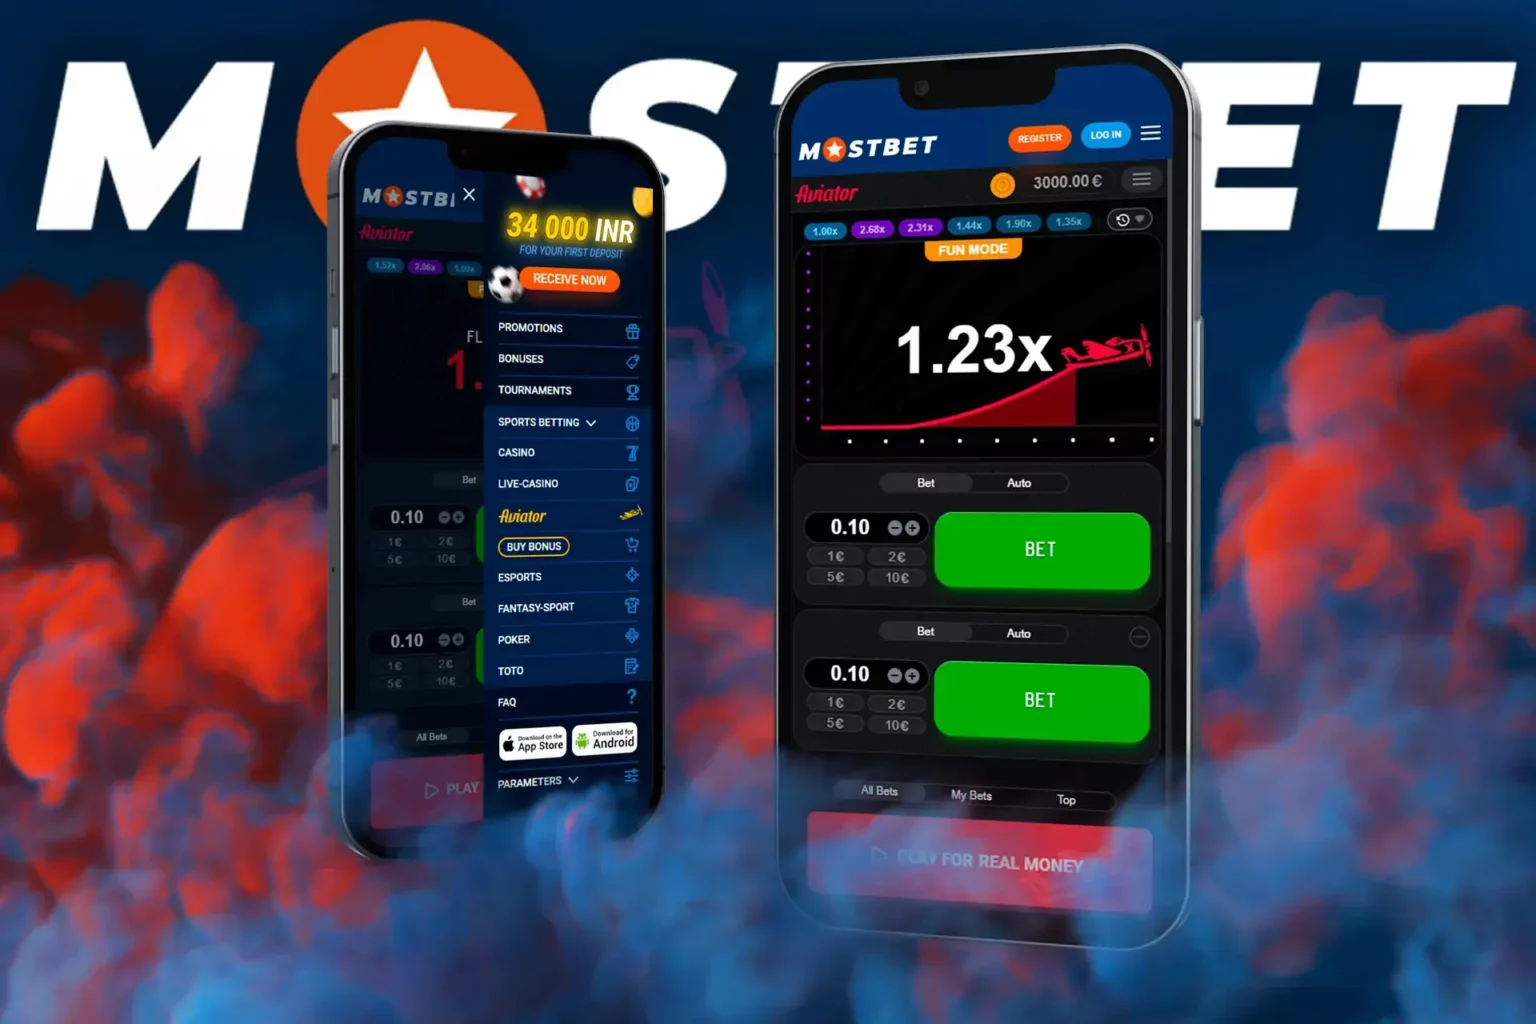 Mostbet app for Android and iOS in Qatar And The Chuck Norris Effect